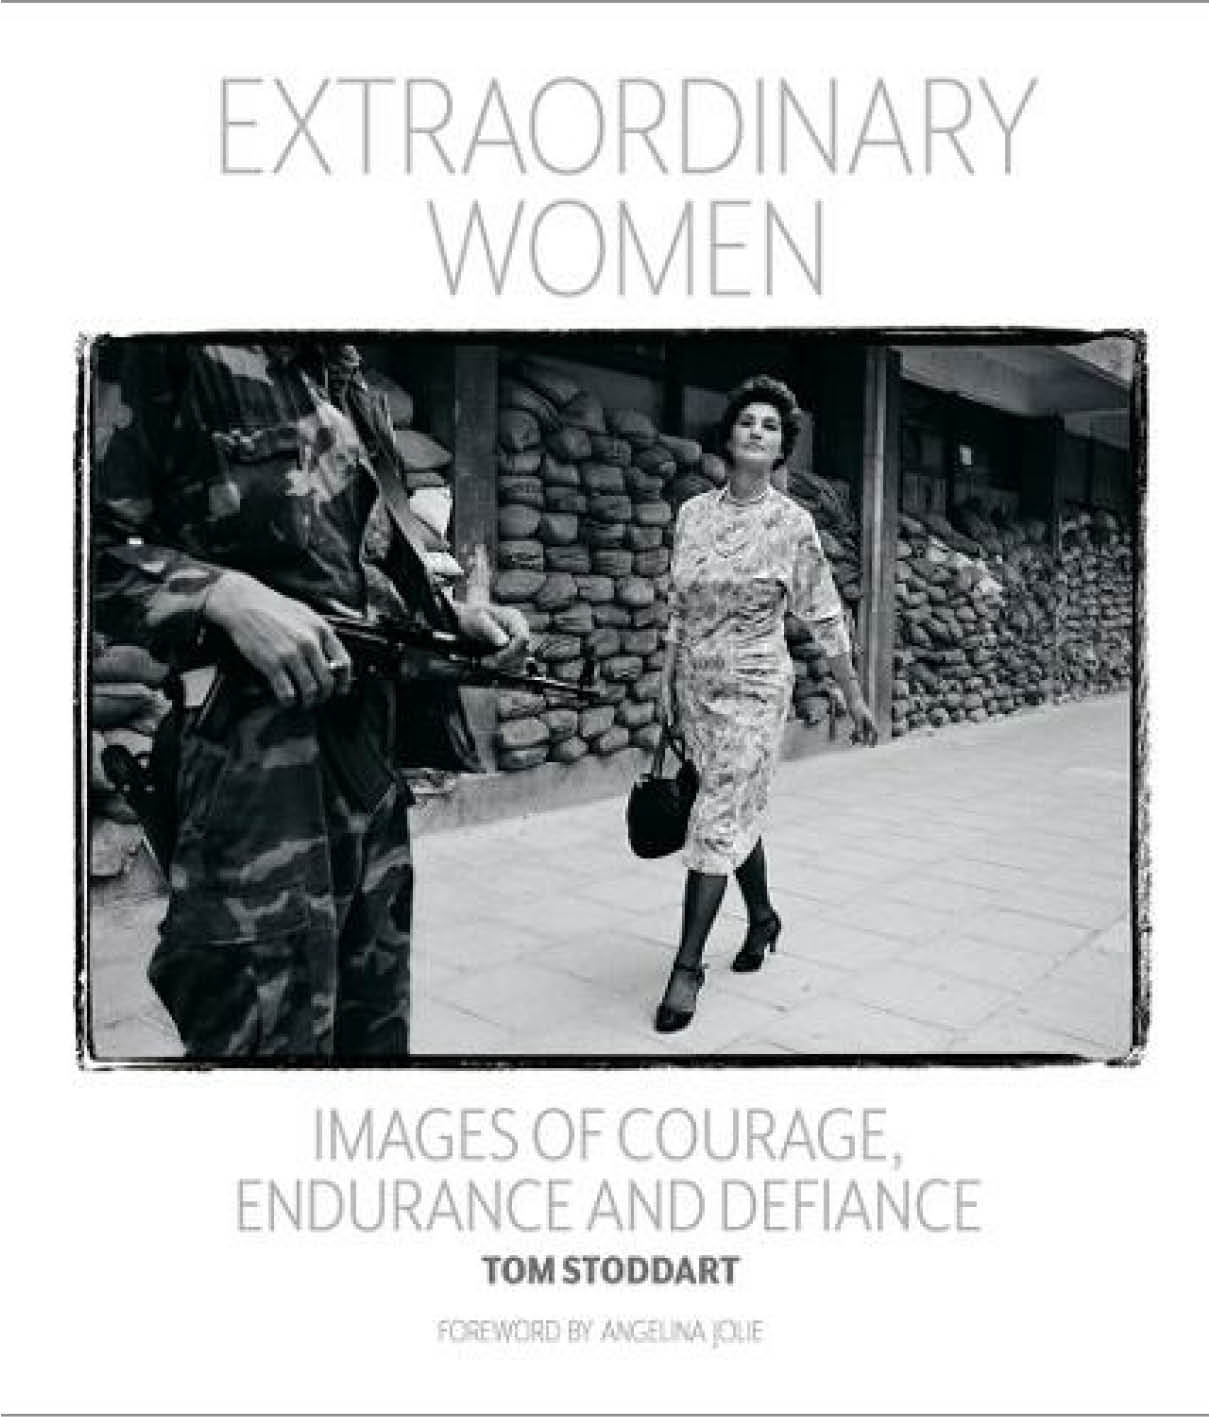 Extraordinary Women: Images of Courage, Endurance & Defiance by Tom Stoddard